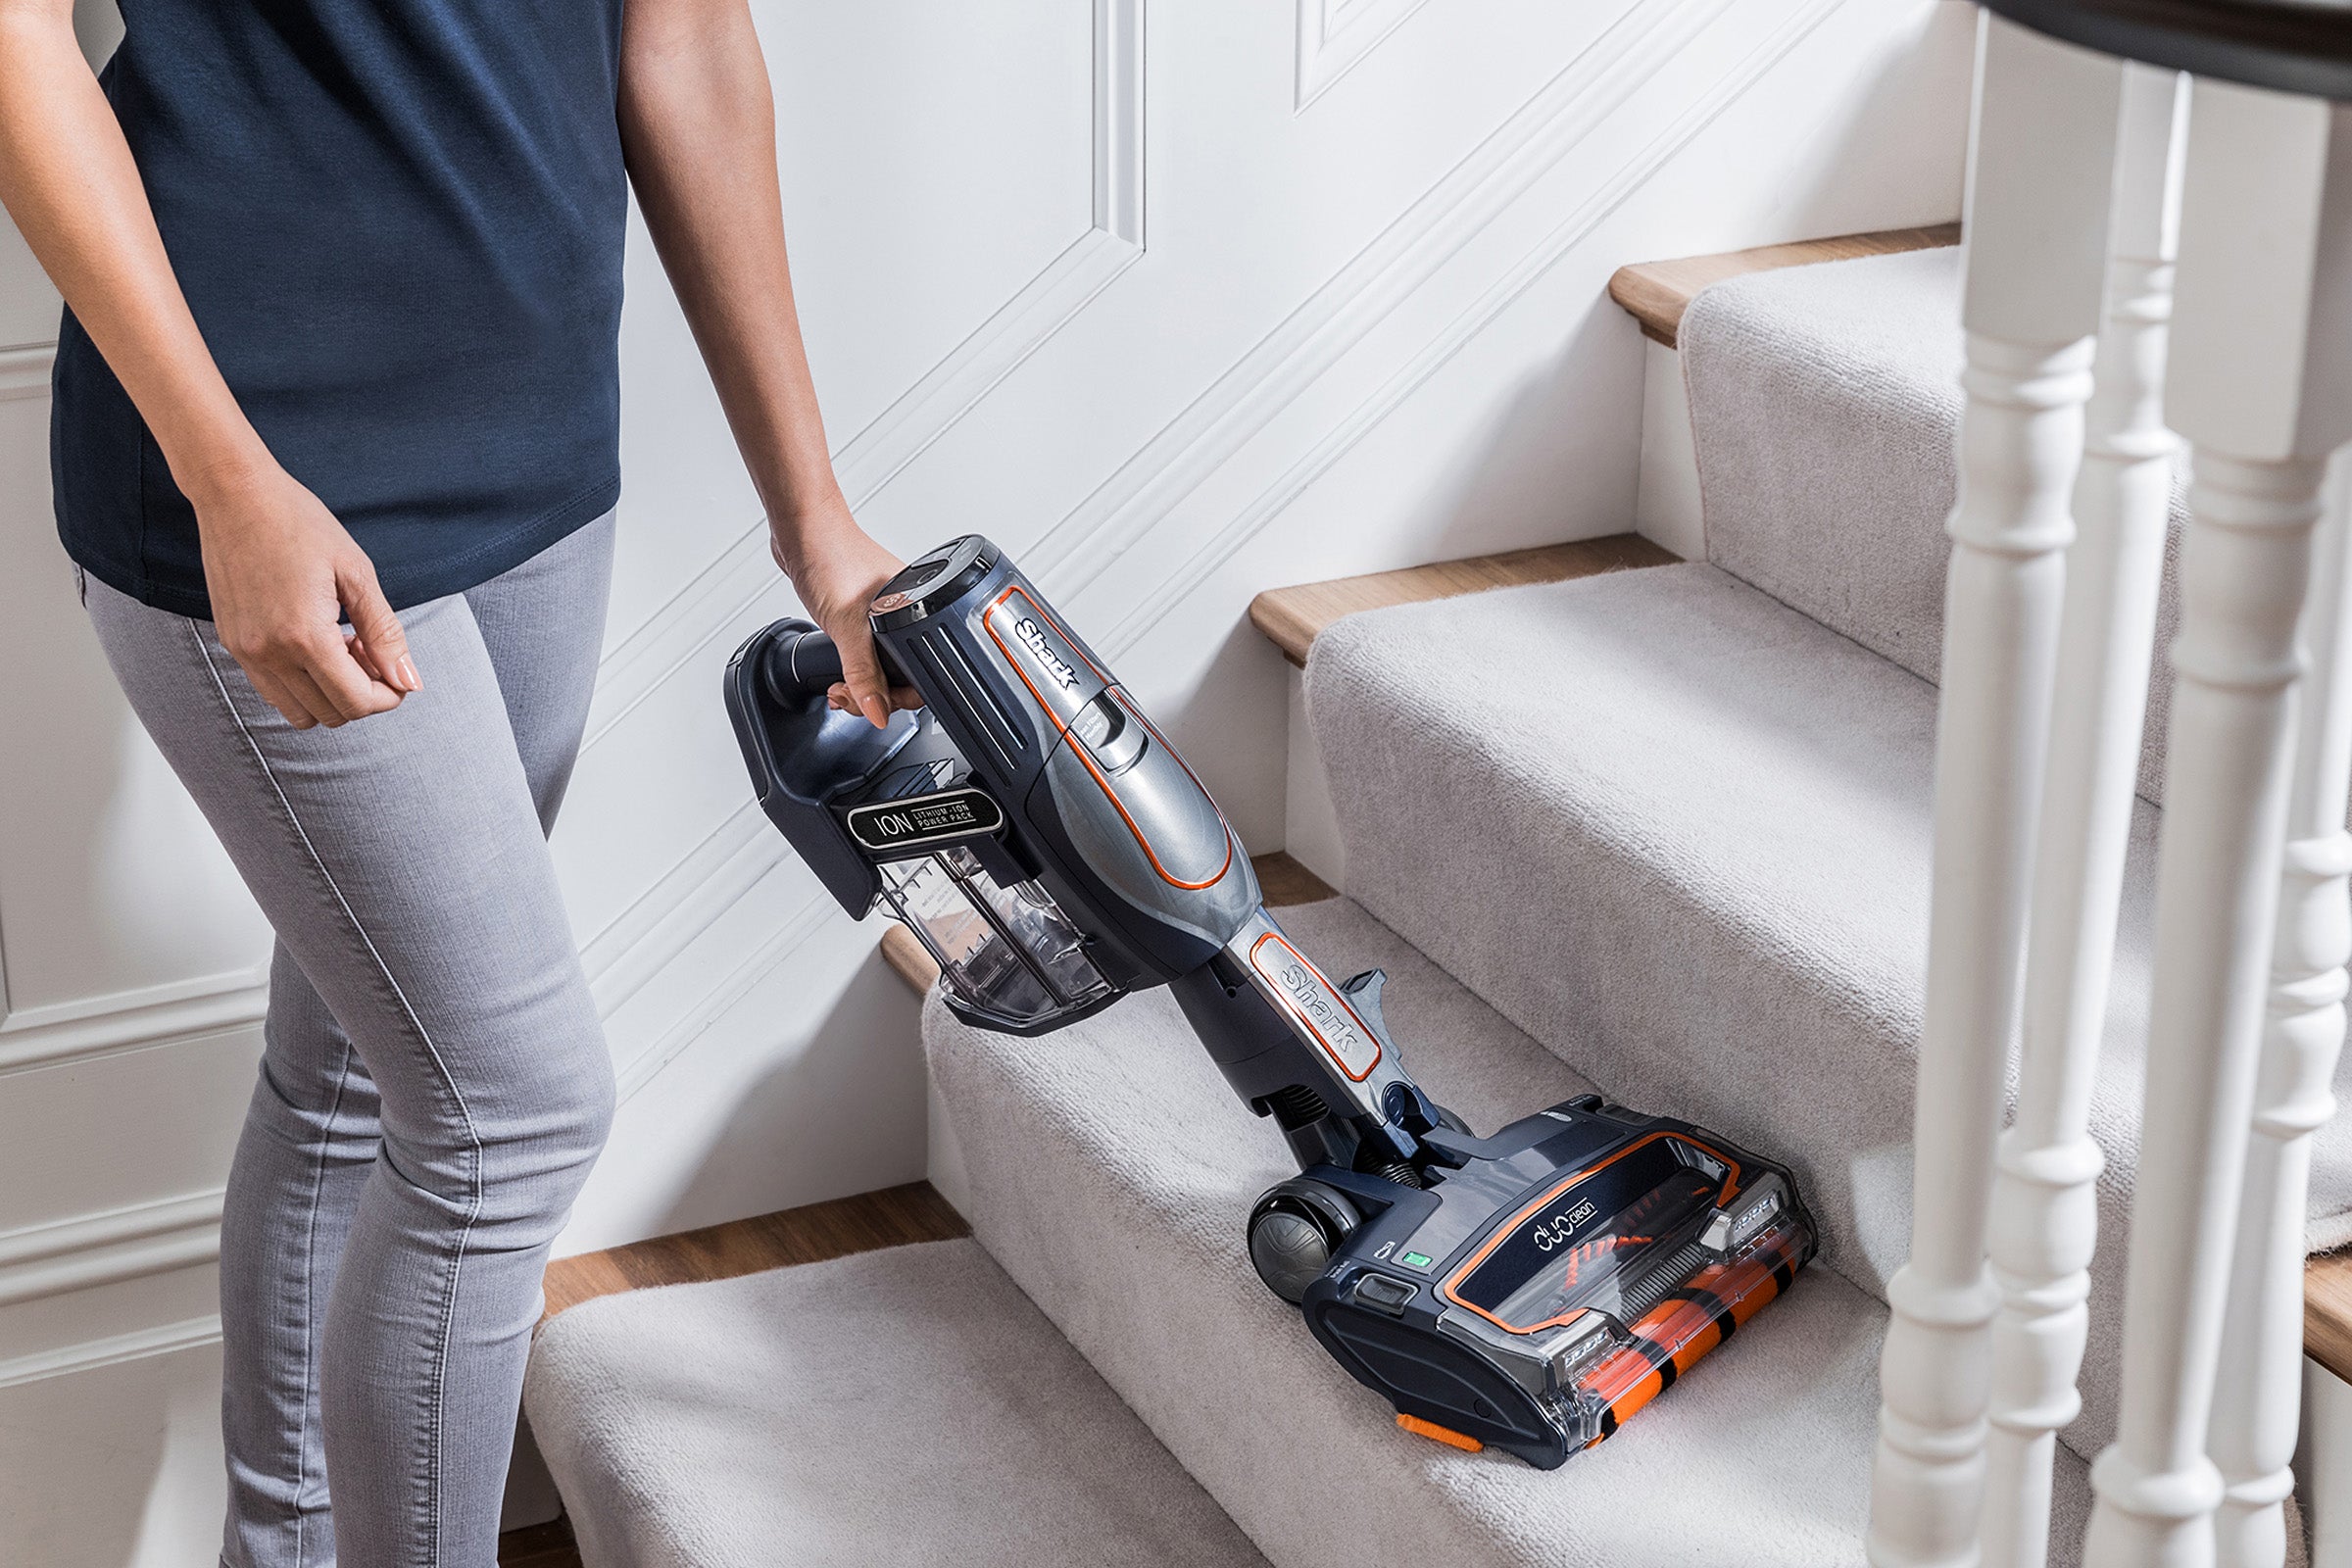 Shark DuoClean Cordless Vacuum used on staircase by person.